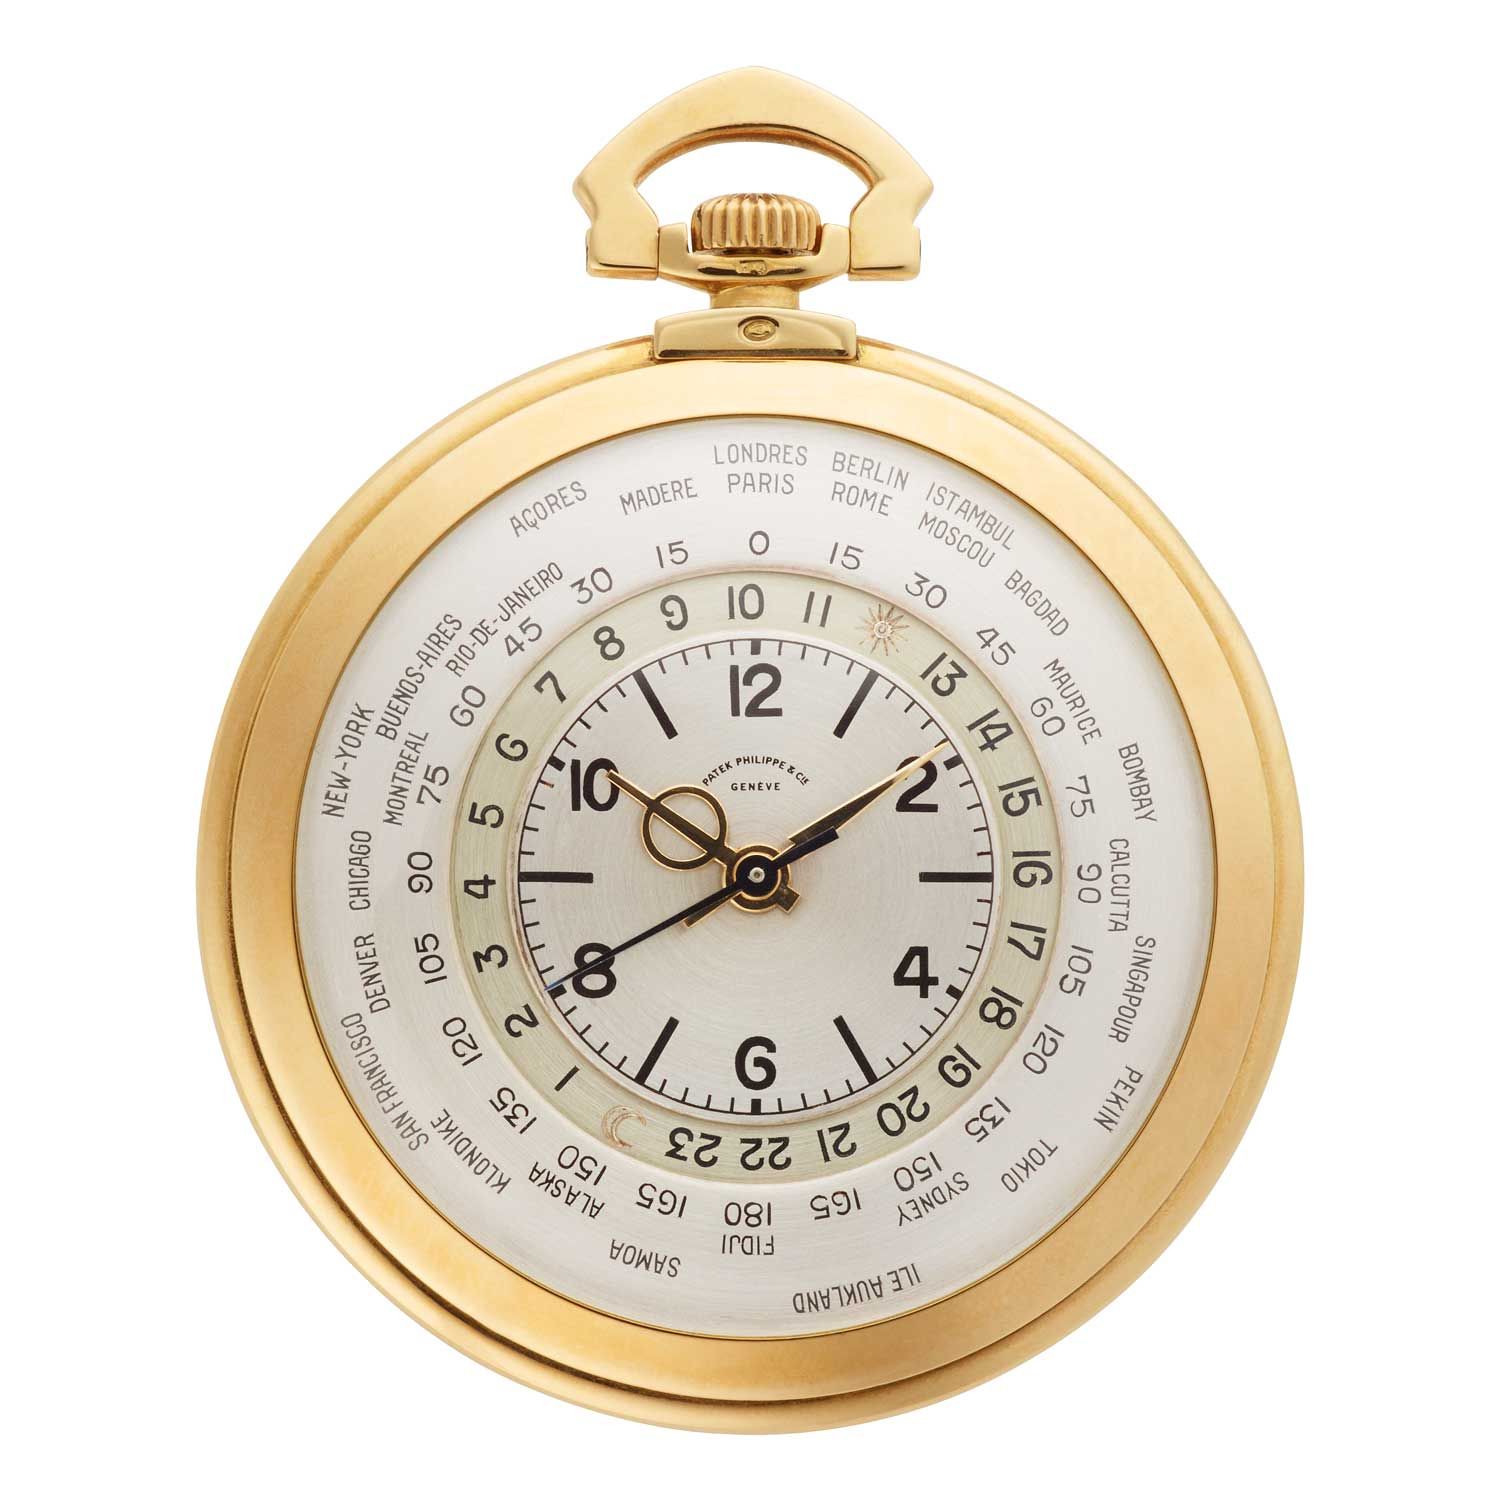 The reference 605 HU was a demonstration of the successful collaborative effort between Patek Philippe and Louis Cottier.